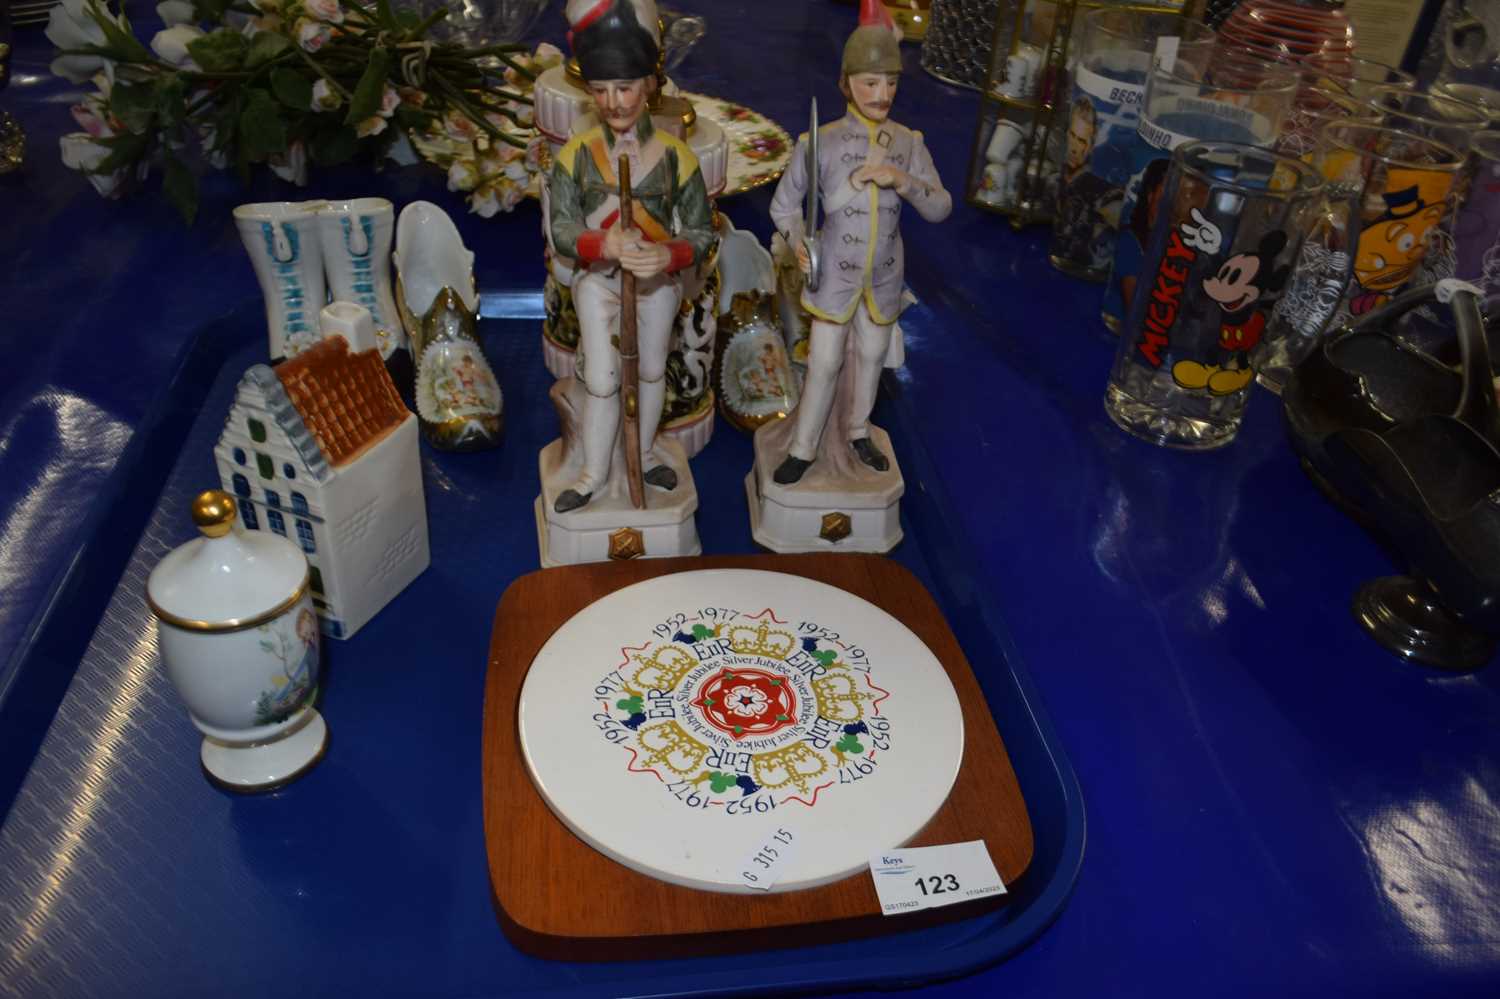 Mixed Lot: Old Country Rose pattern wall clock, various figurines, porcelain shoes, porcelain